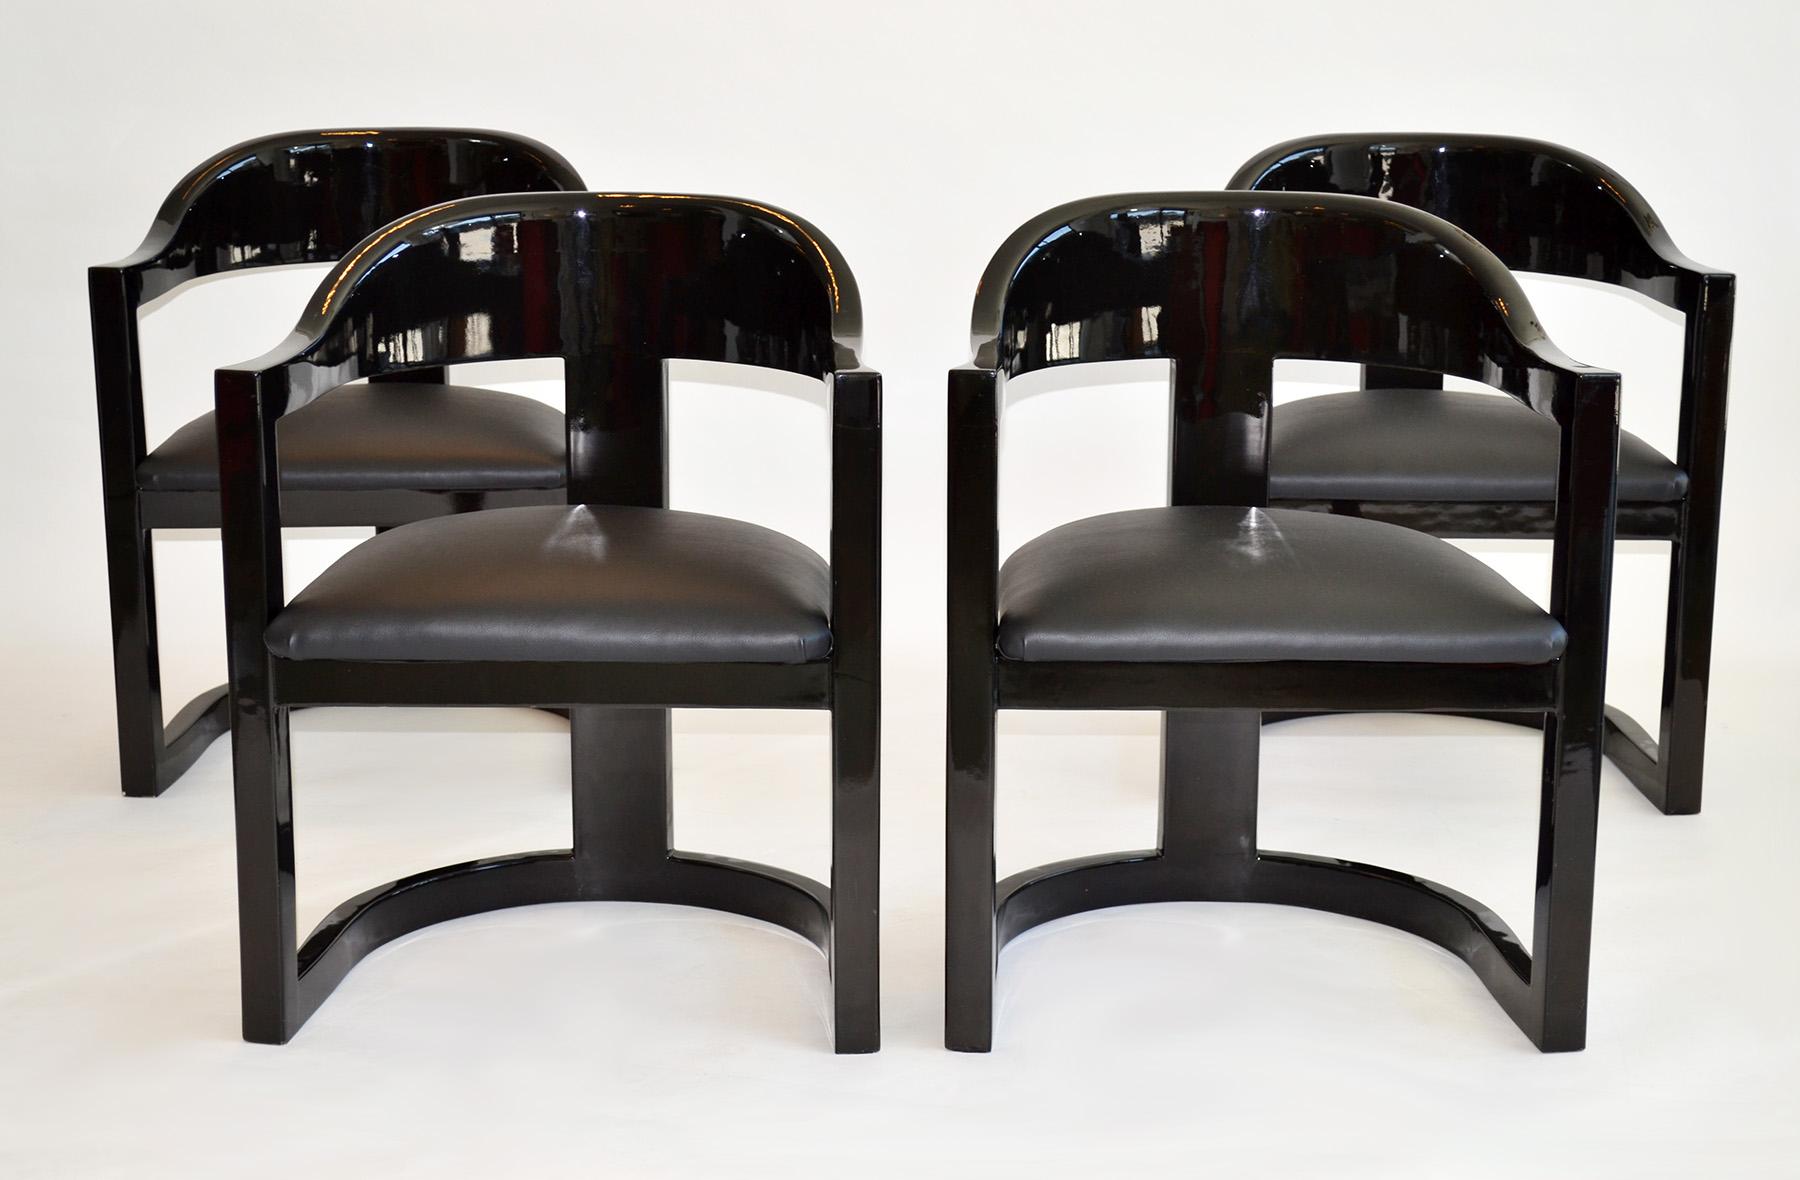 Set of Four Springer Onassis Style Dining Chairs in Lacquered Goatskin by Garcel
Designed in the 1980s for Jimeco Ltda, these chairs exude an air of sophistication and luxury. The sleek, minimalist design draws inspiration from Karl Springer’s